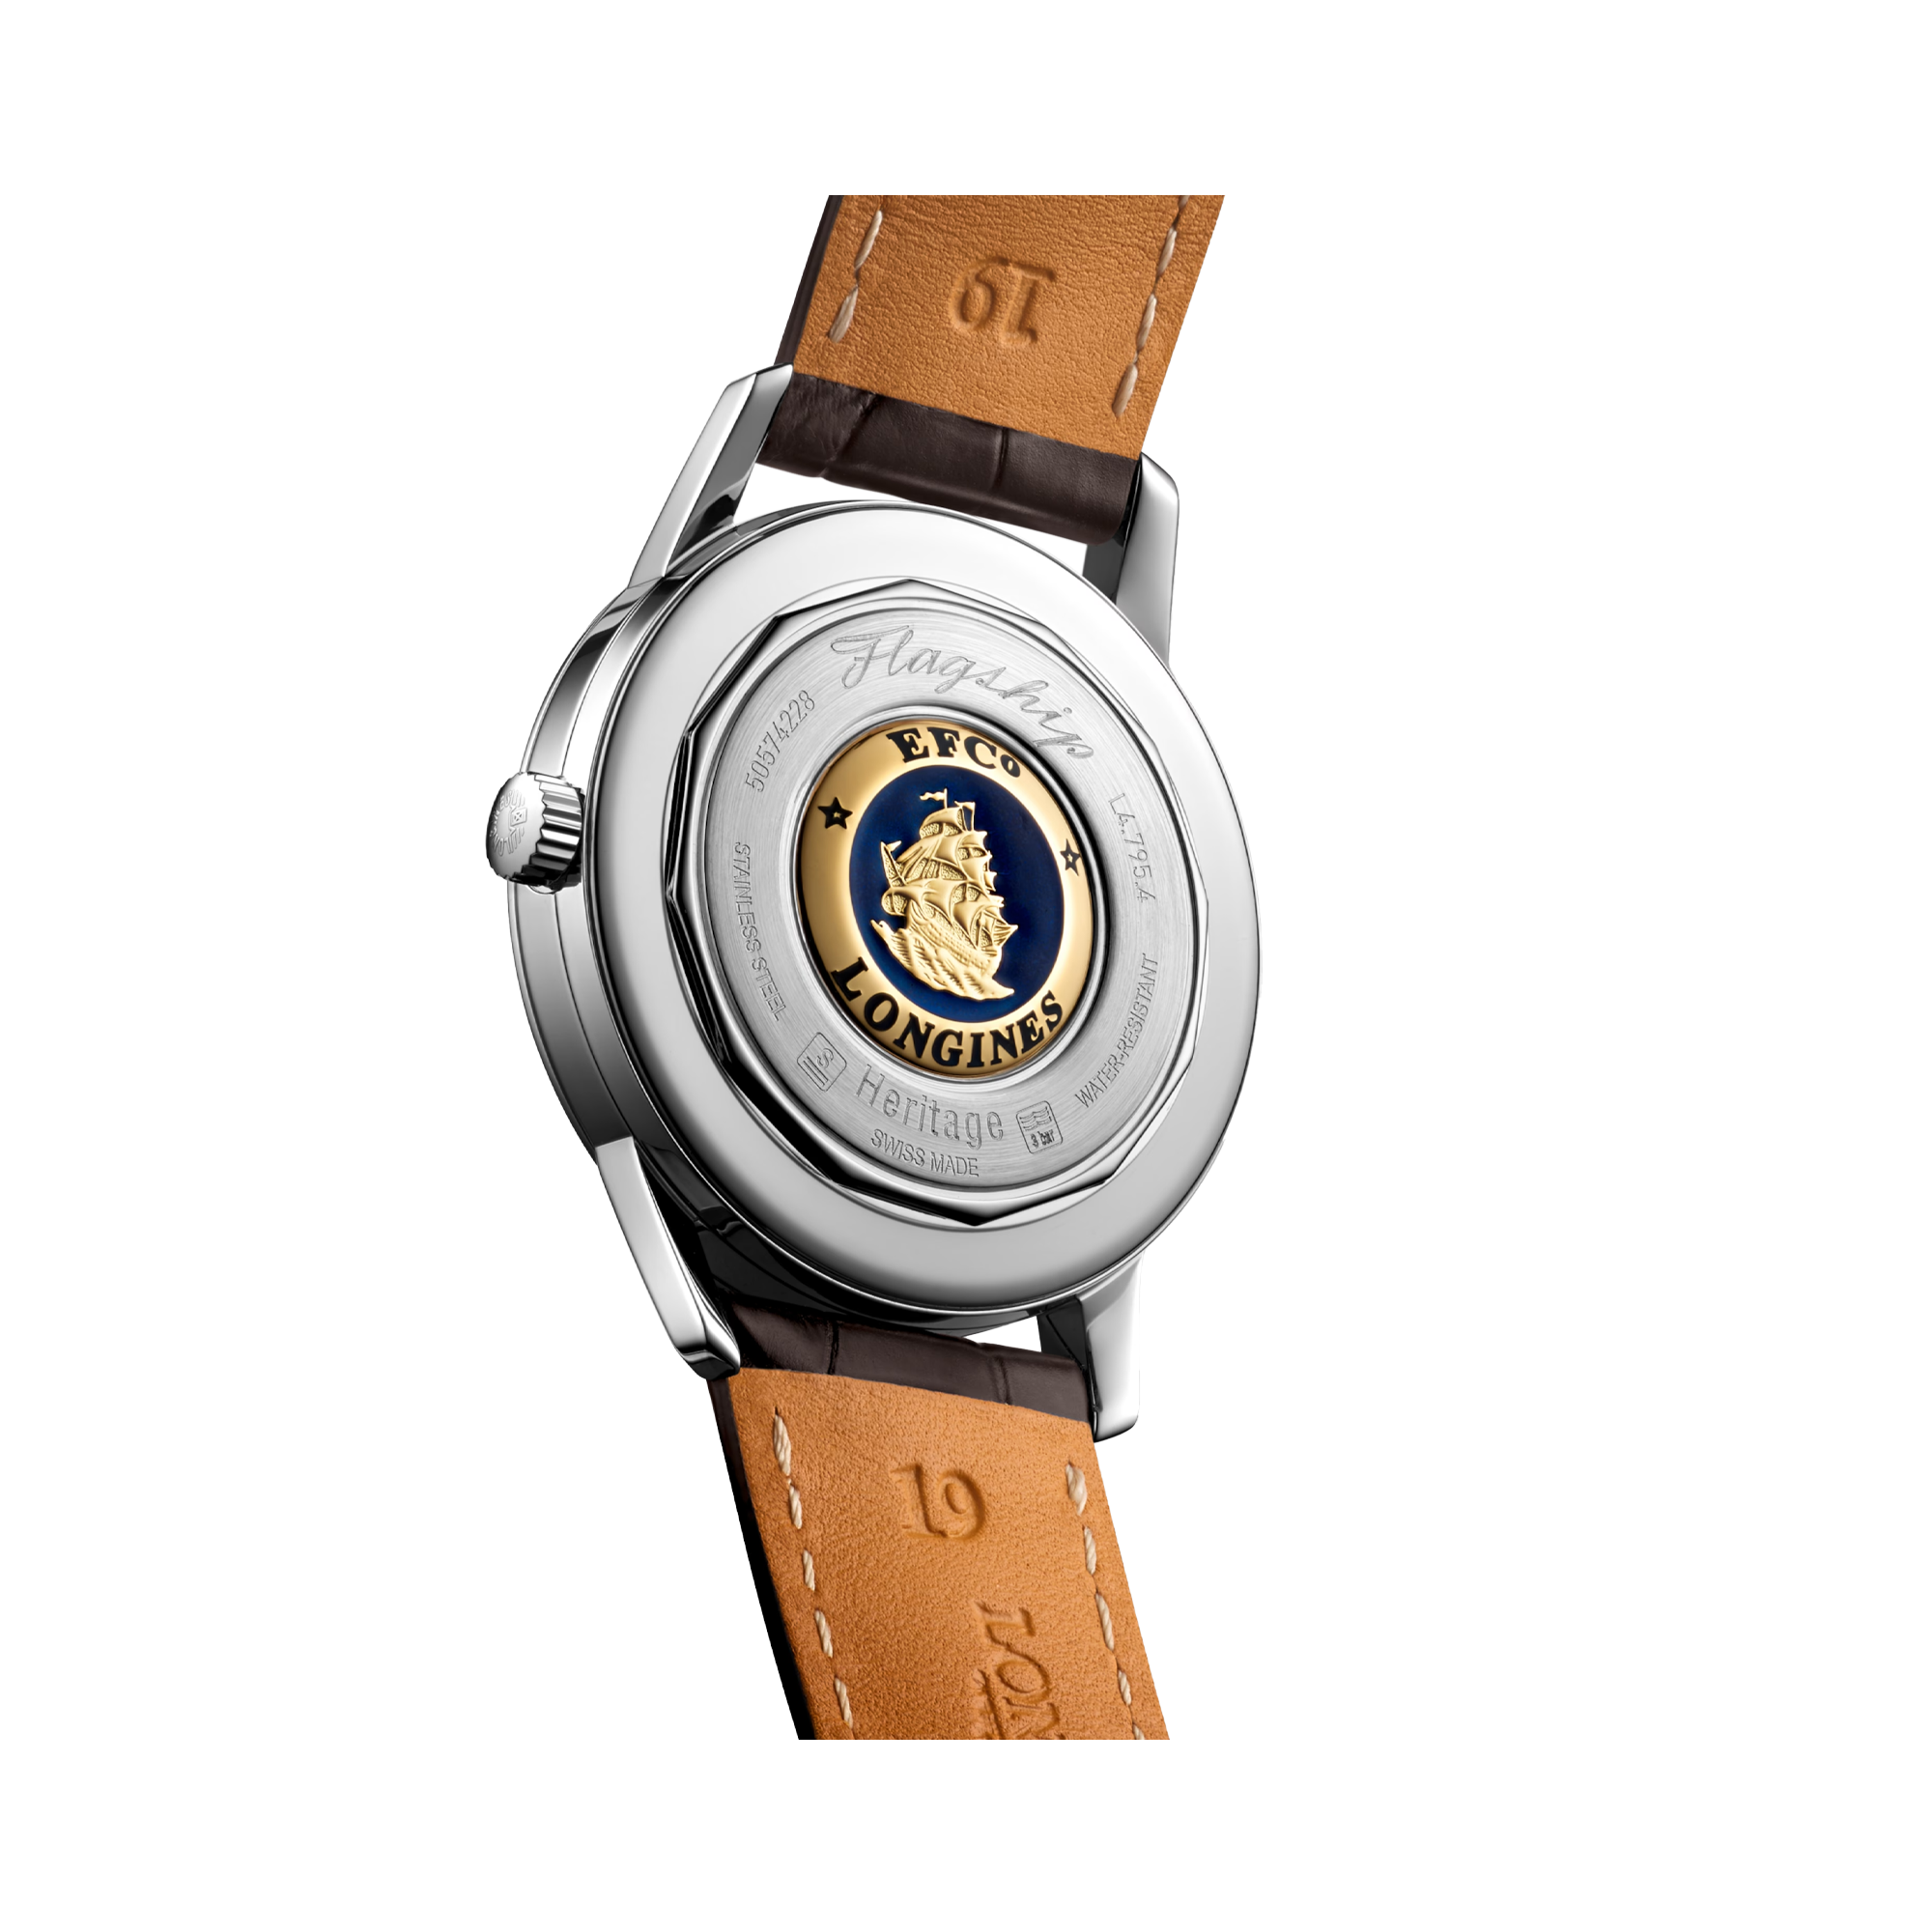 Longines Flagship Heritage 38.5mm, Silver Dial, Baton Numerals_3